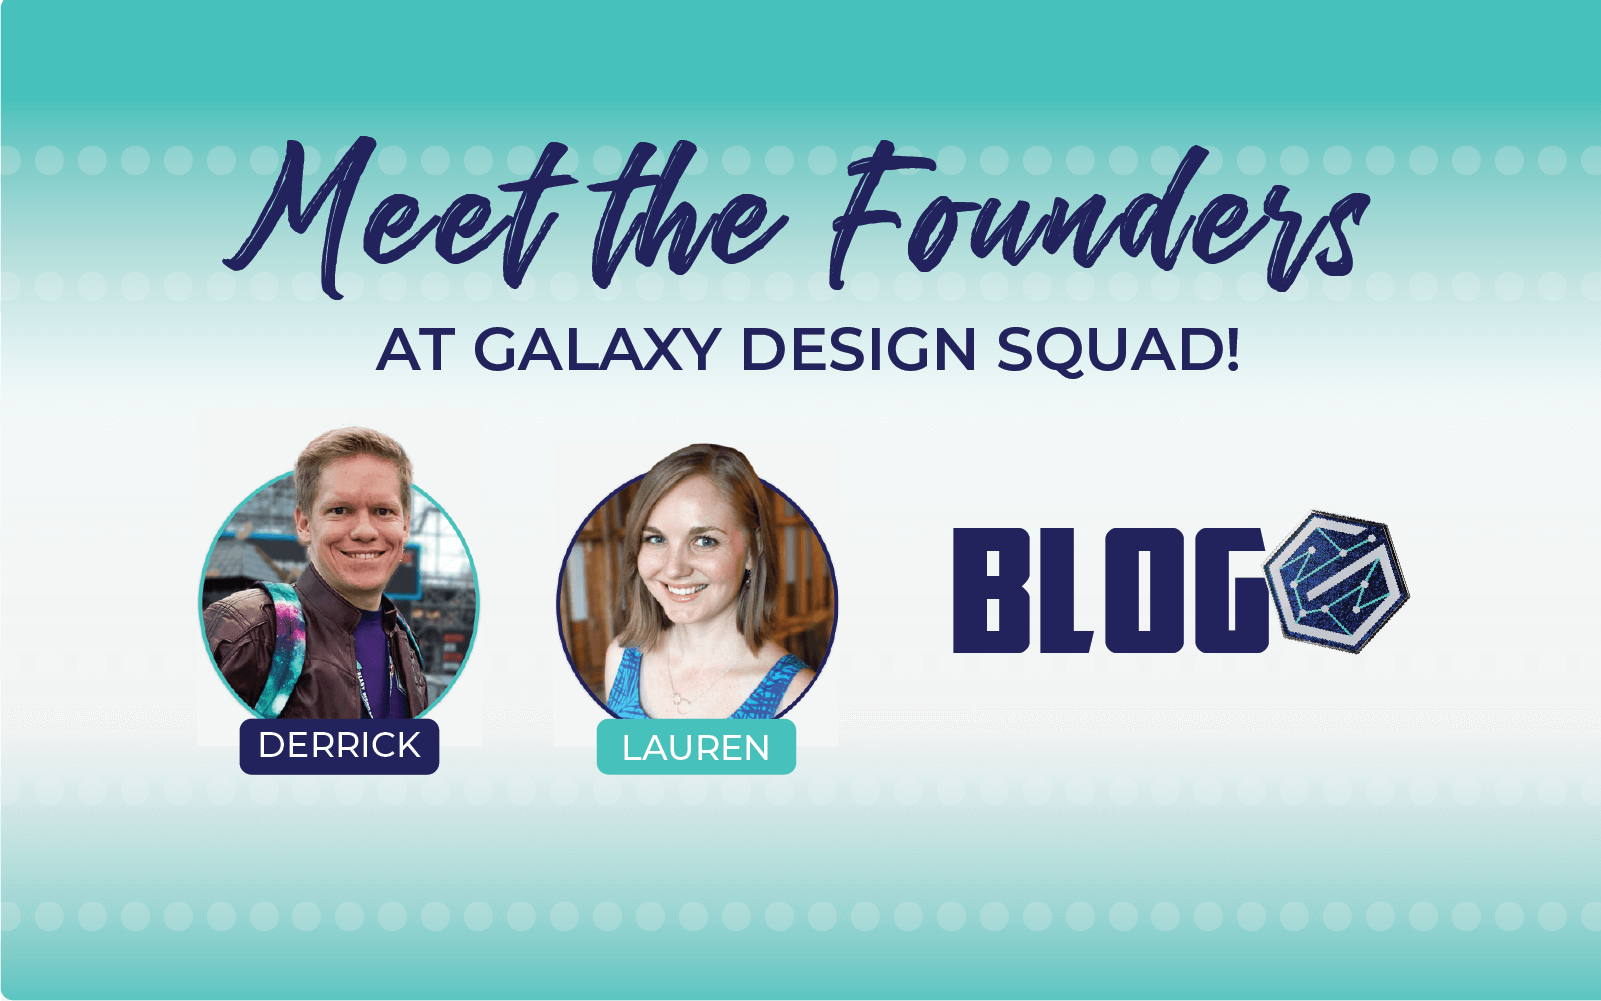 Meet the Founders of Galaxy Design Squad!